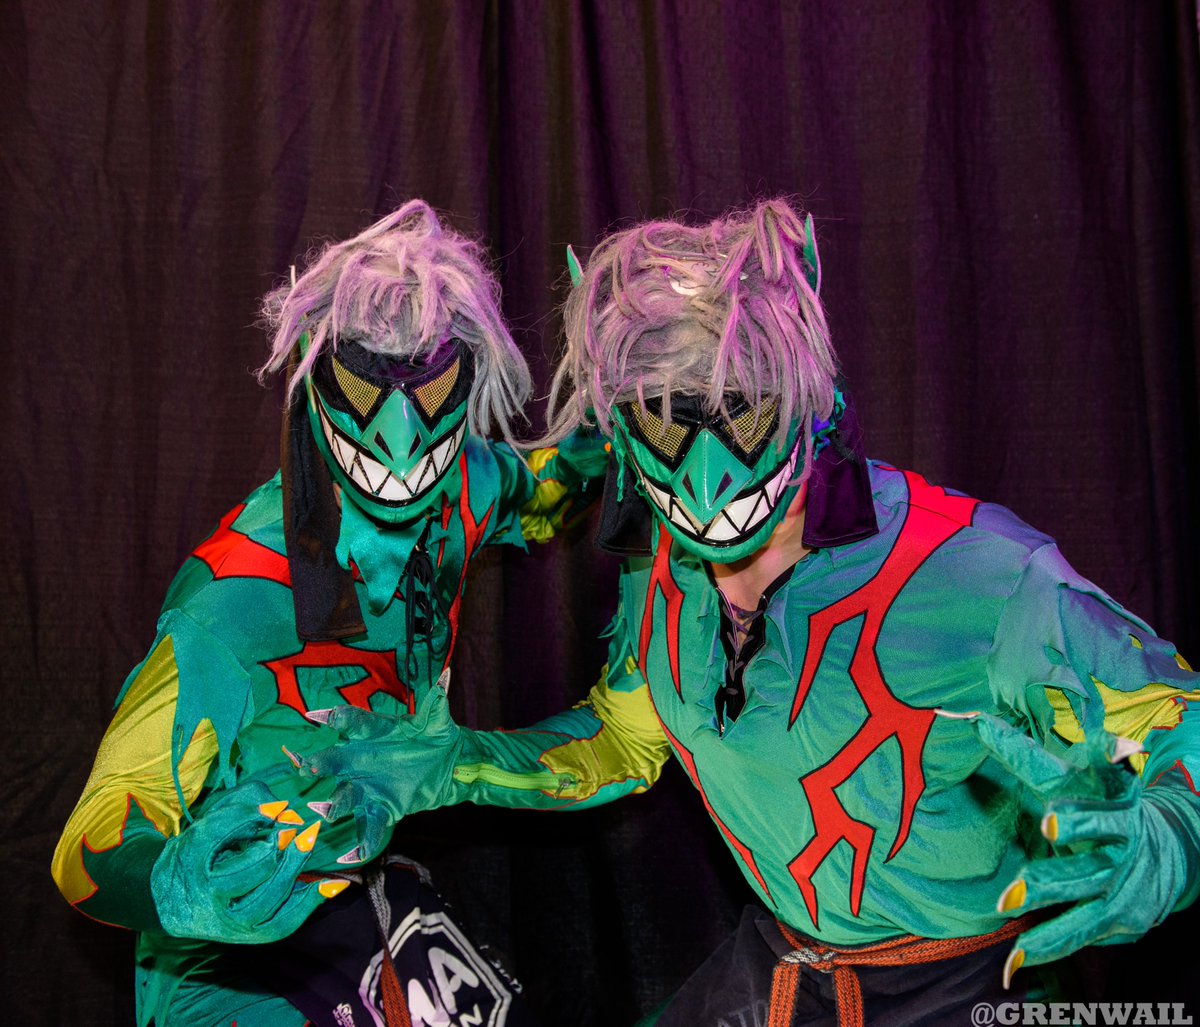 3 more days until @DaikaijuPro Vol 2 on 4/27/2024. Kappa are gathering in the Worcester area, be alert for Kappa Kozo and Kappa Junior. Report any sightings and seek safety, DO NOT ENGAGE.